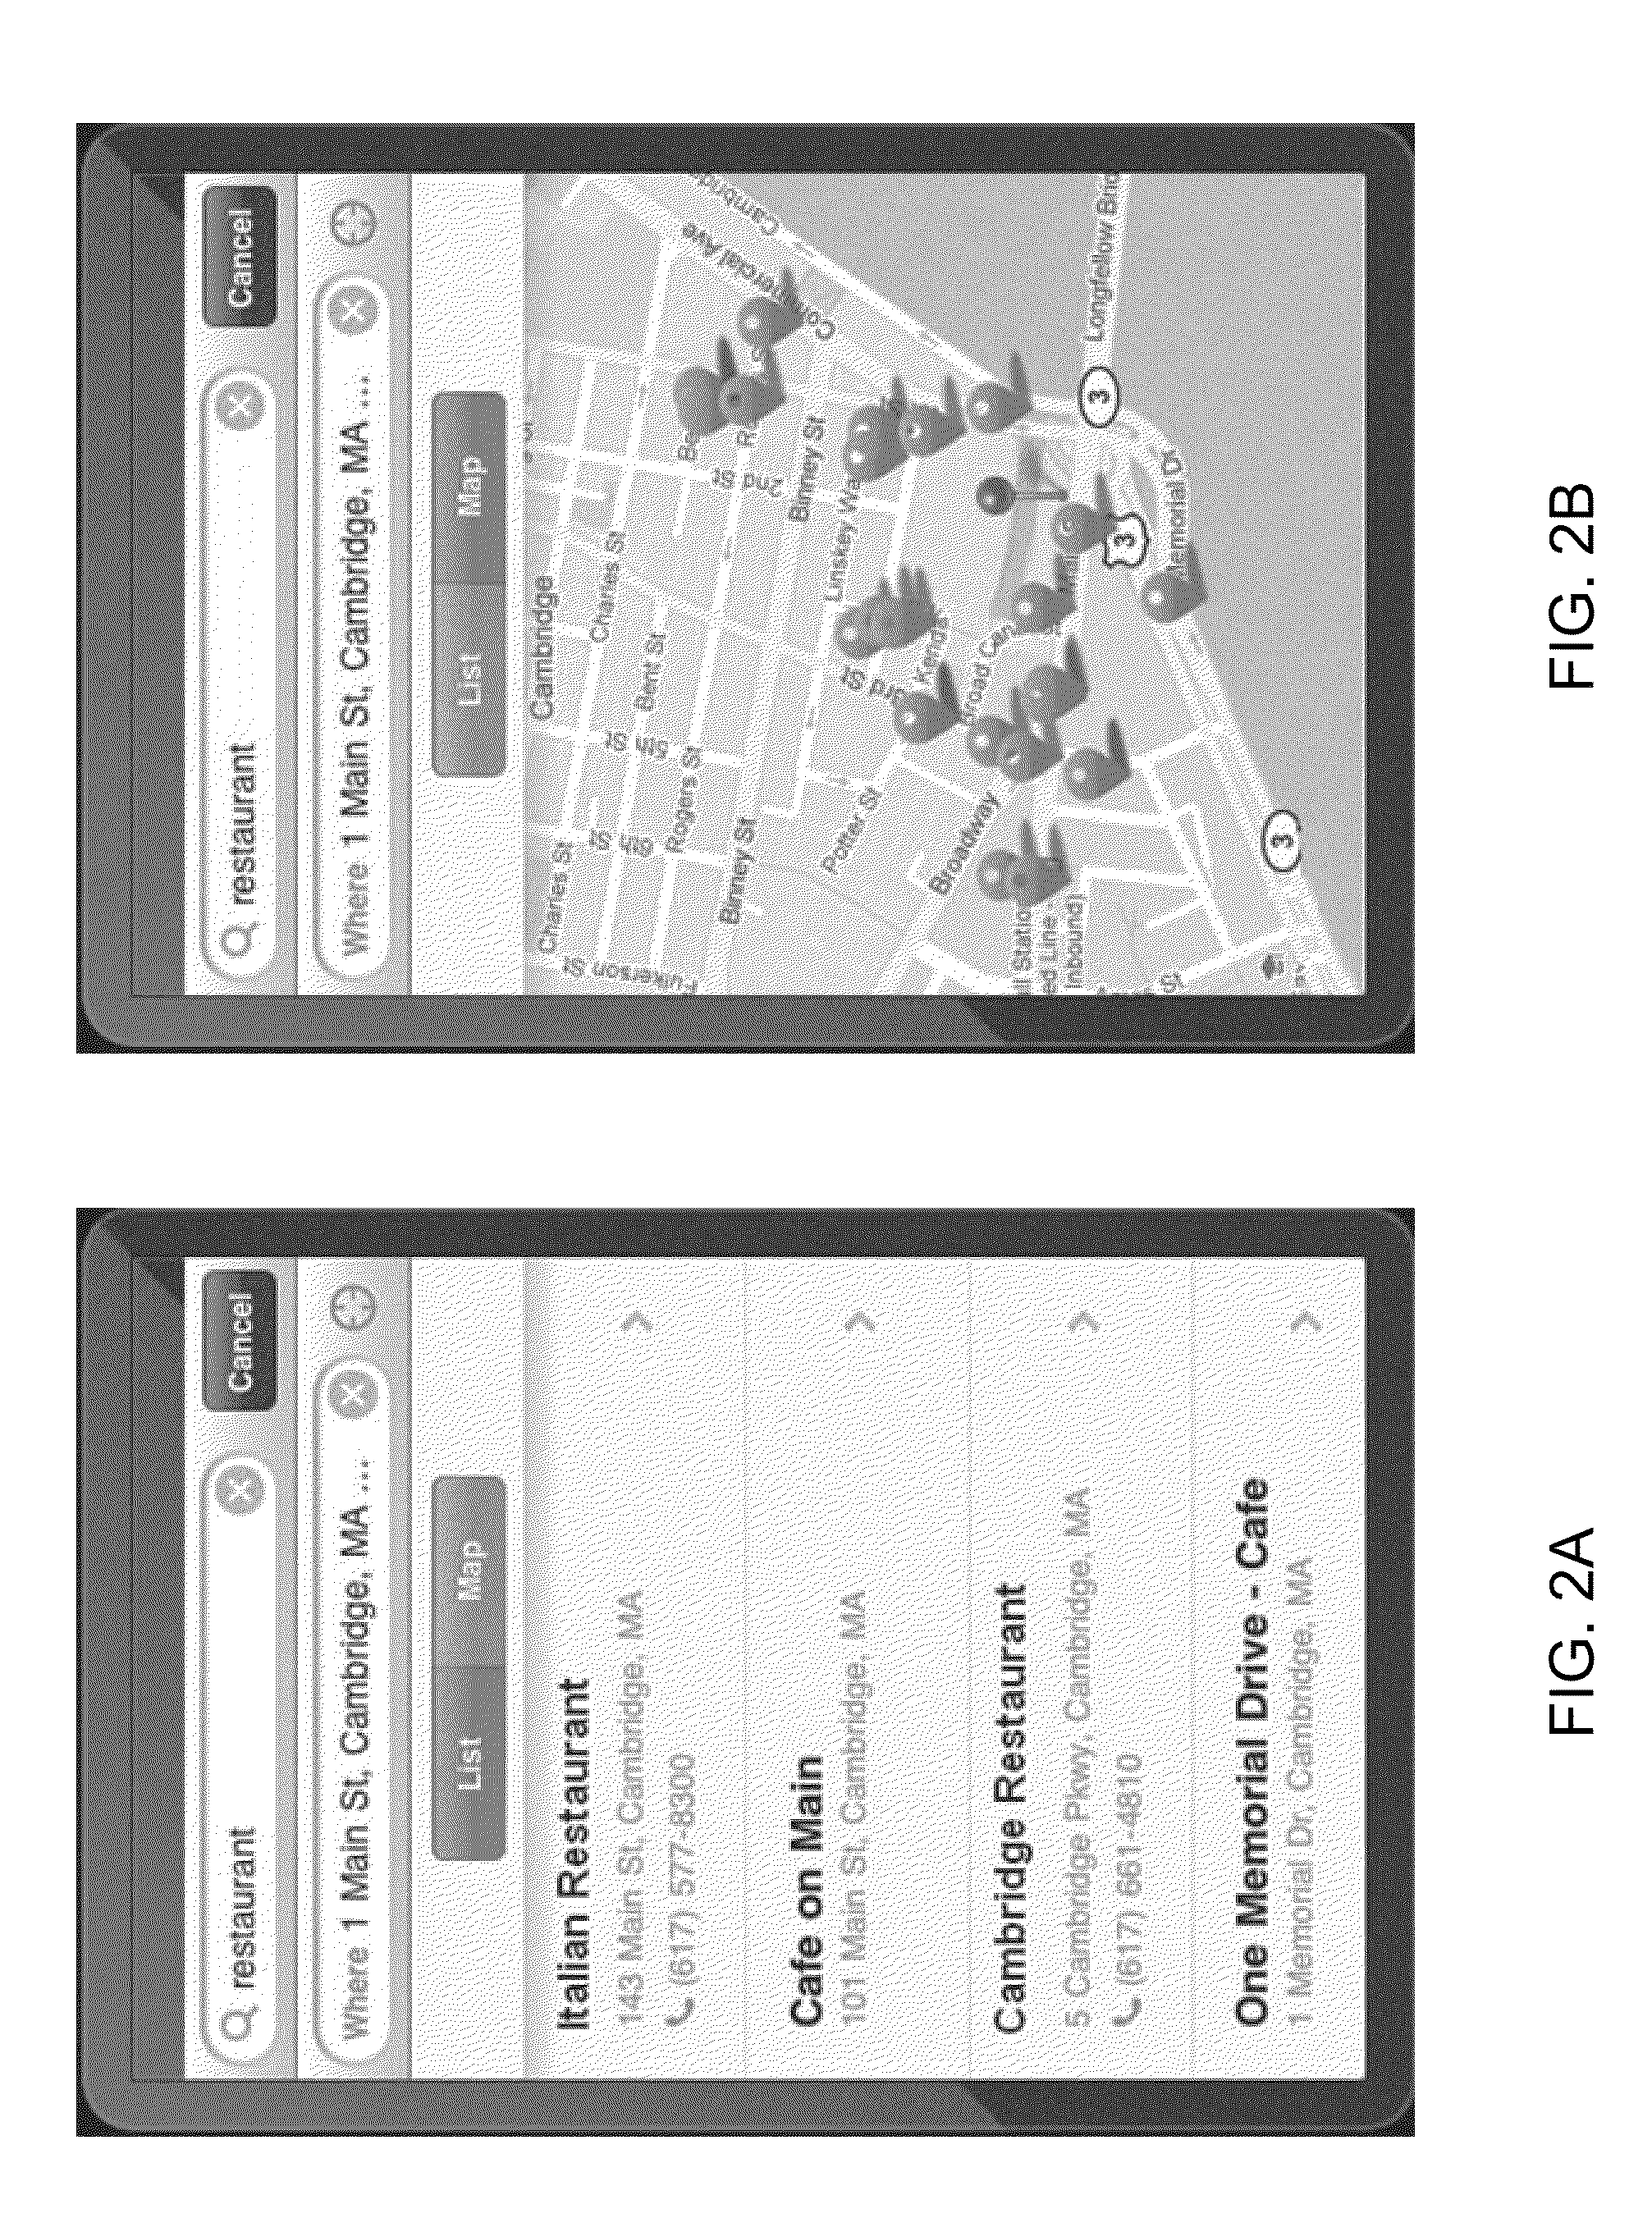 Multi-user communication system and method